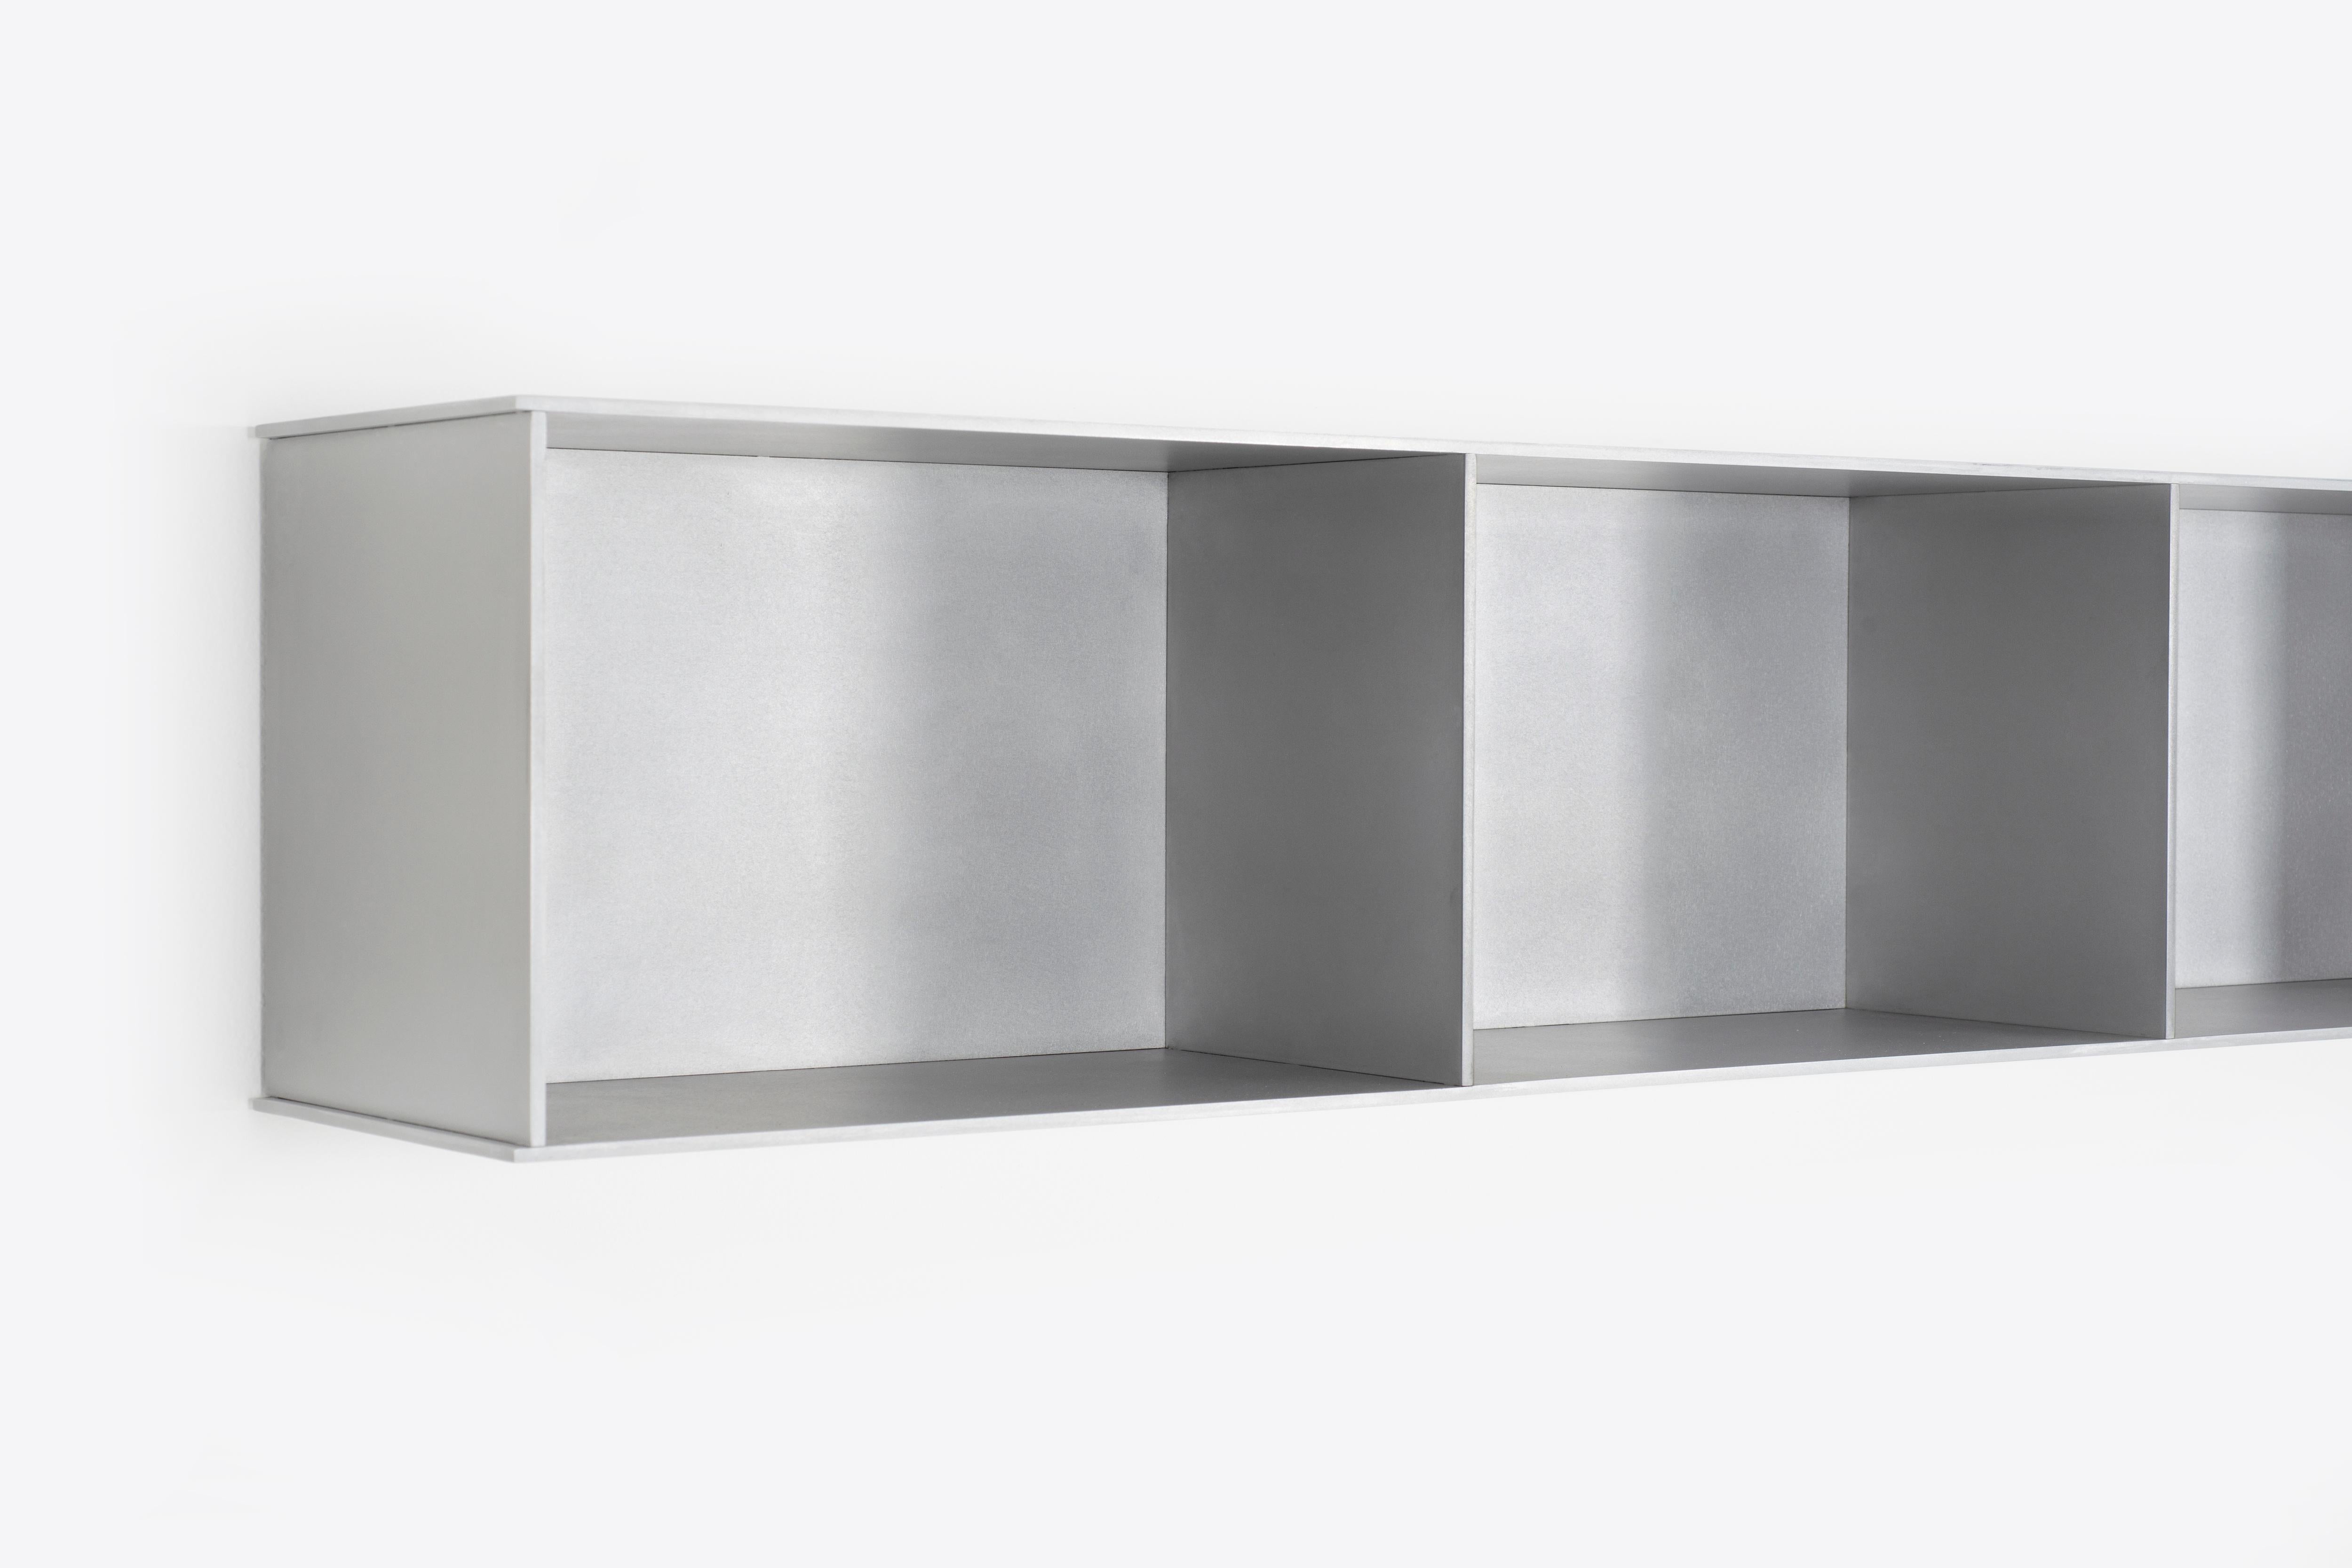 The Minimalist wall-mounted, 91 wide, 5G shelf is sculpted out of 1/4 inch thick, wax-polished aluminum. Each shelf has an inset welded U-channel that spans the length of the shelf and easily mounts on included custom-bent steel Z-clips. Each bay of